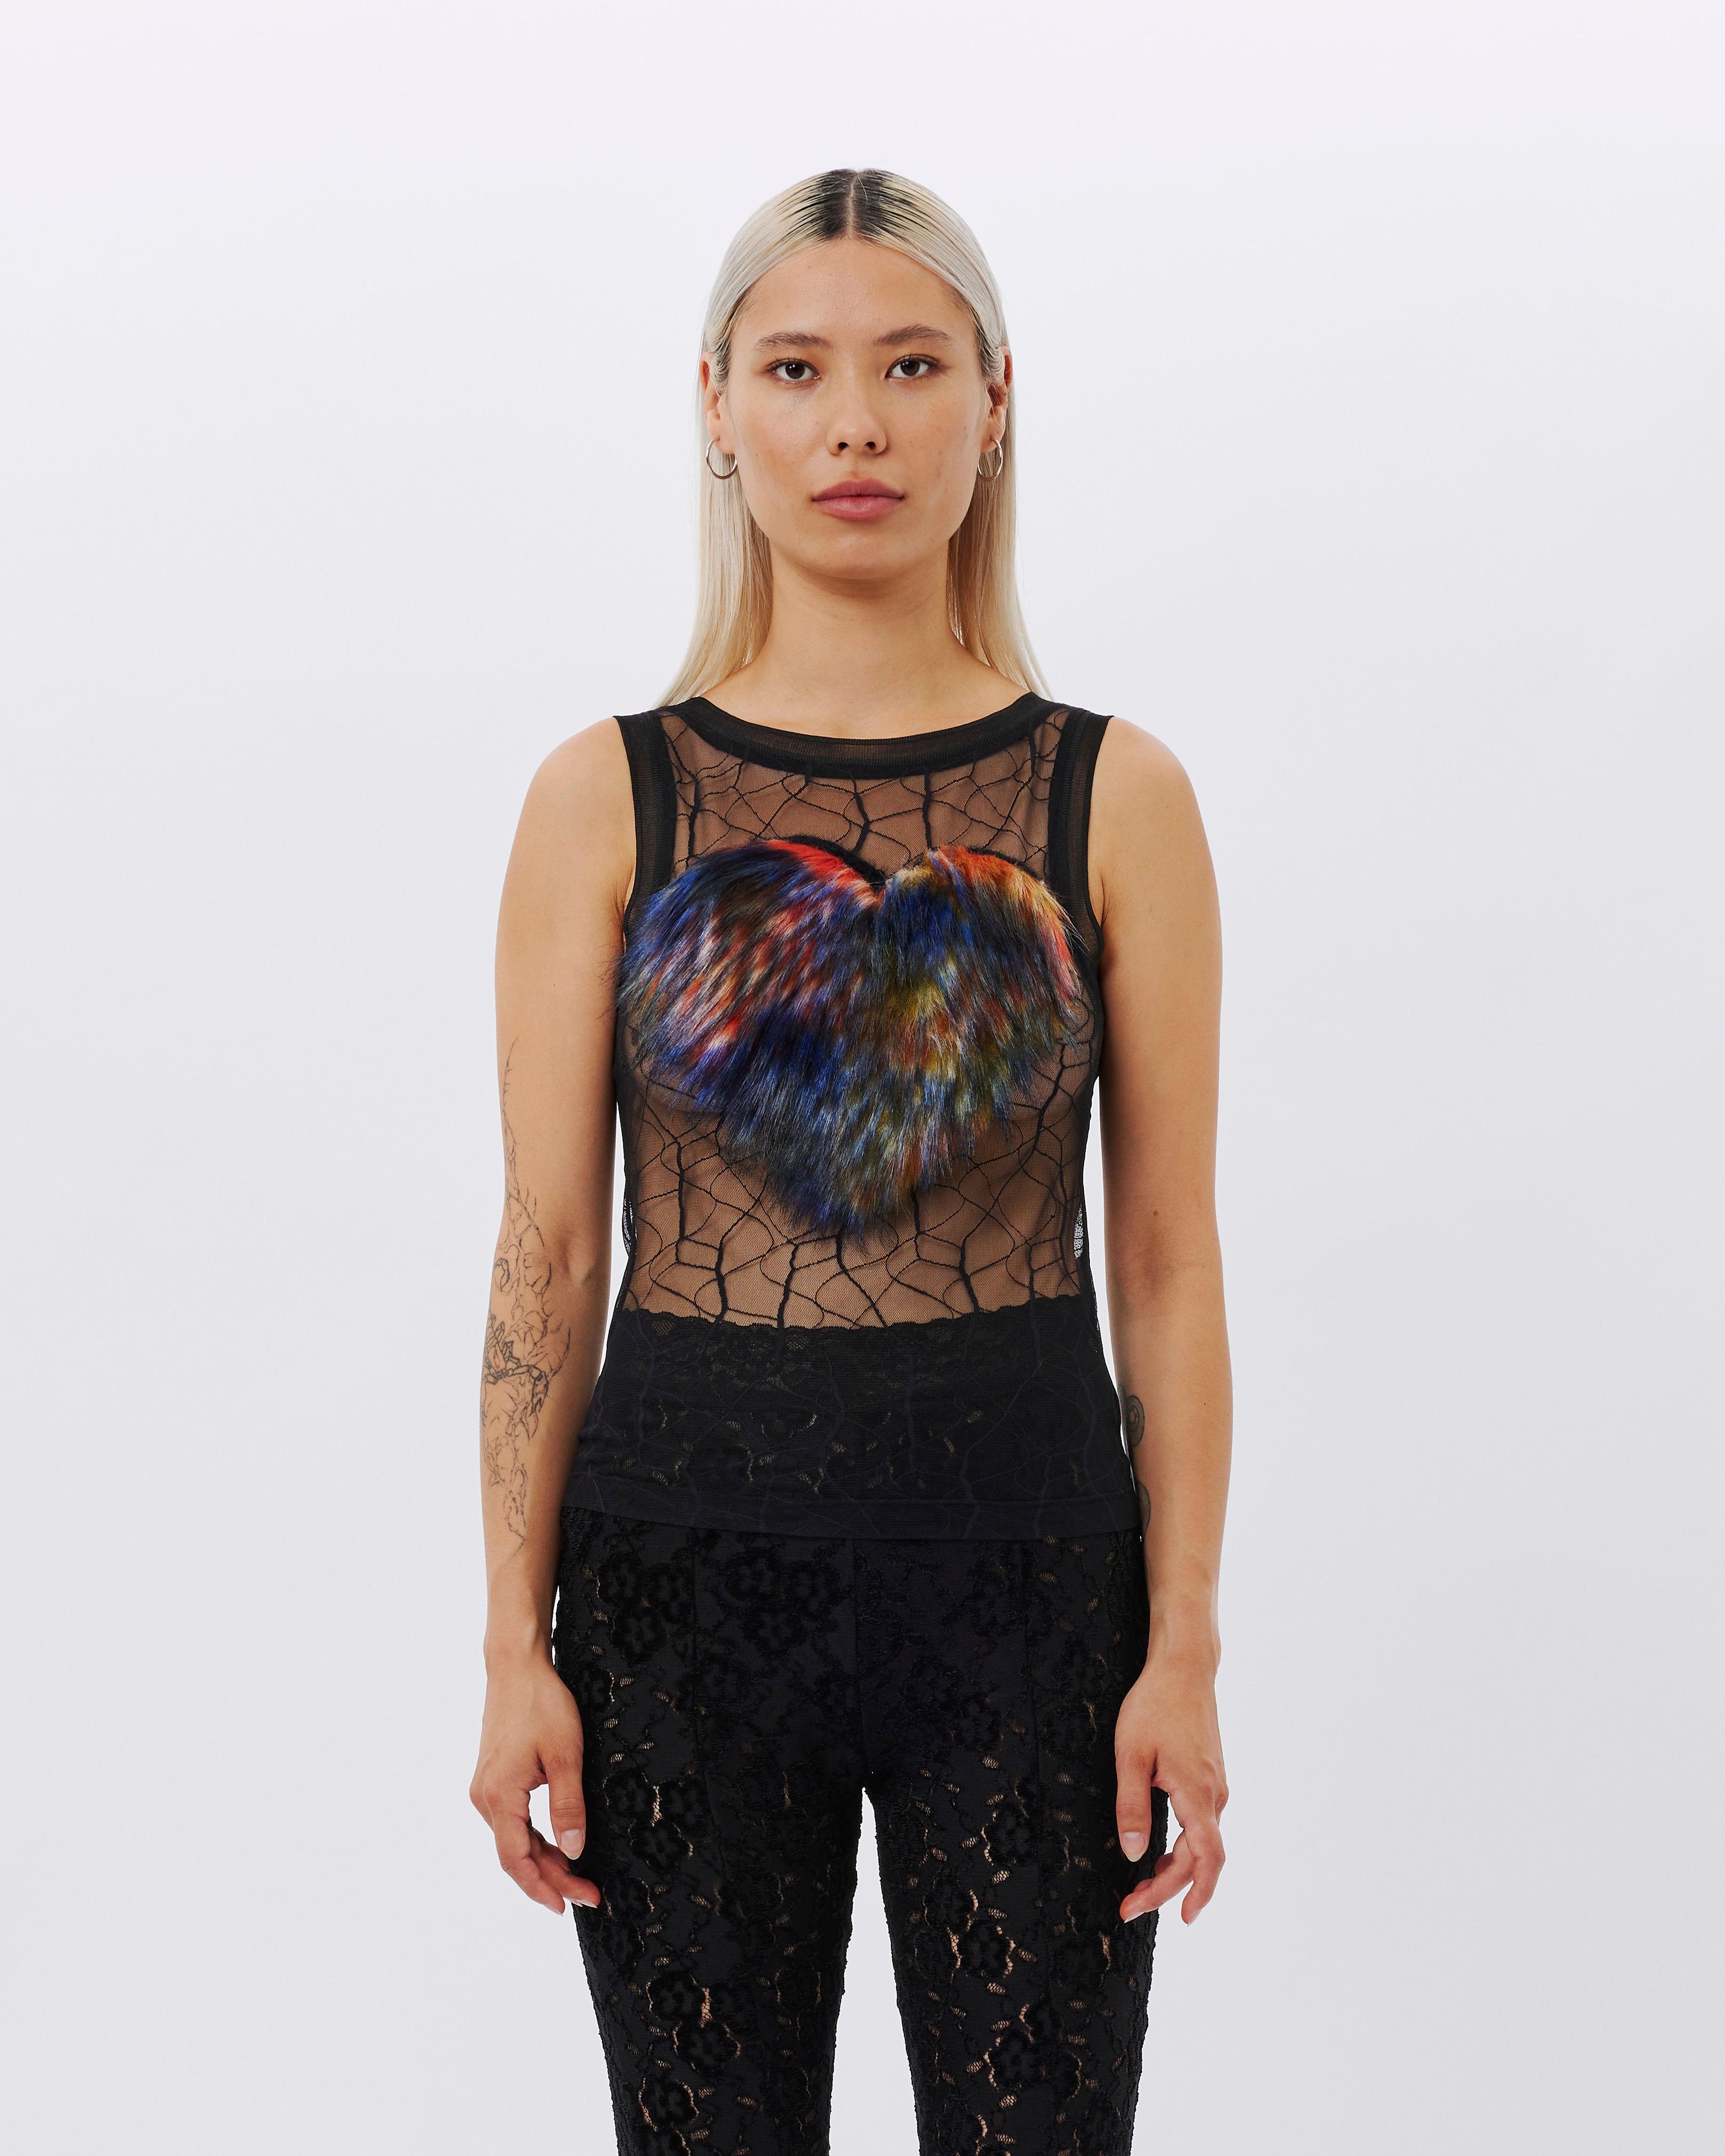 Andersson Bell Heart Fur Mesh Top BLACK atb984w-BLK